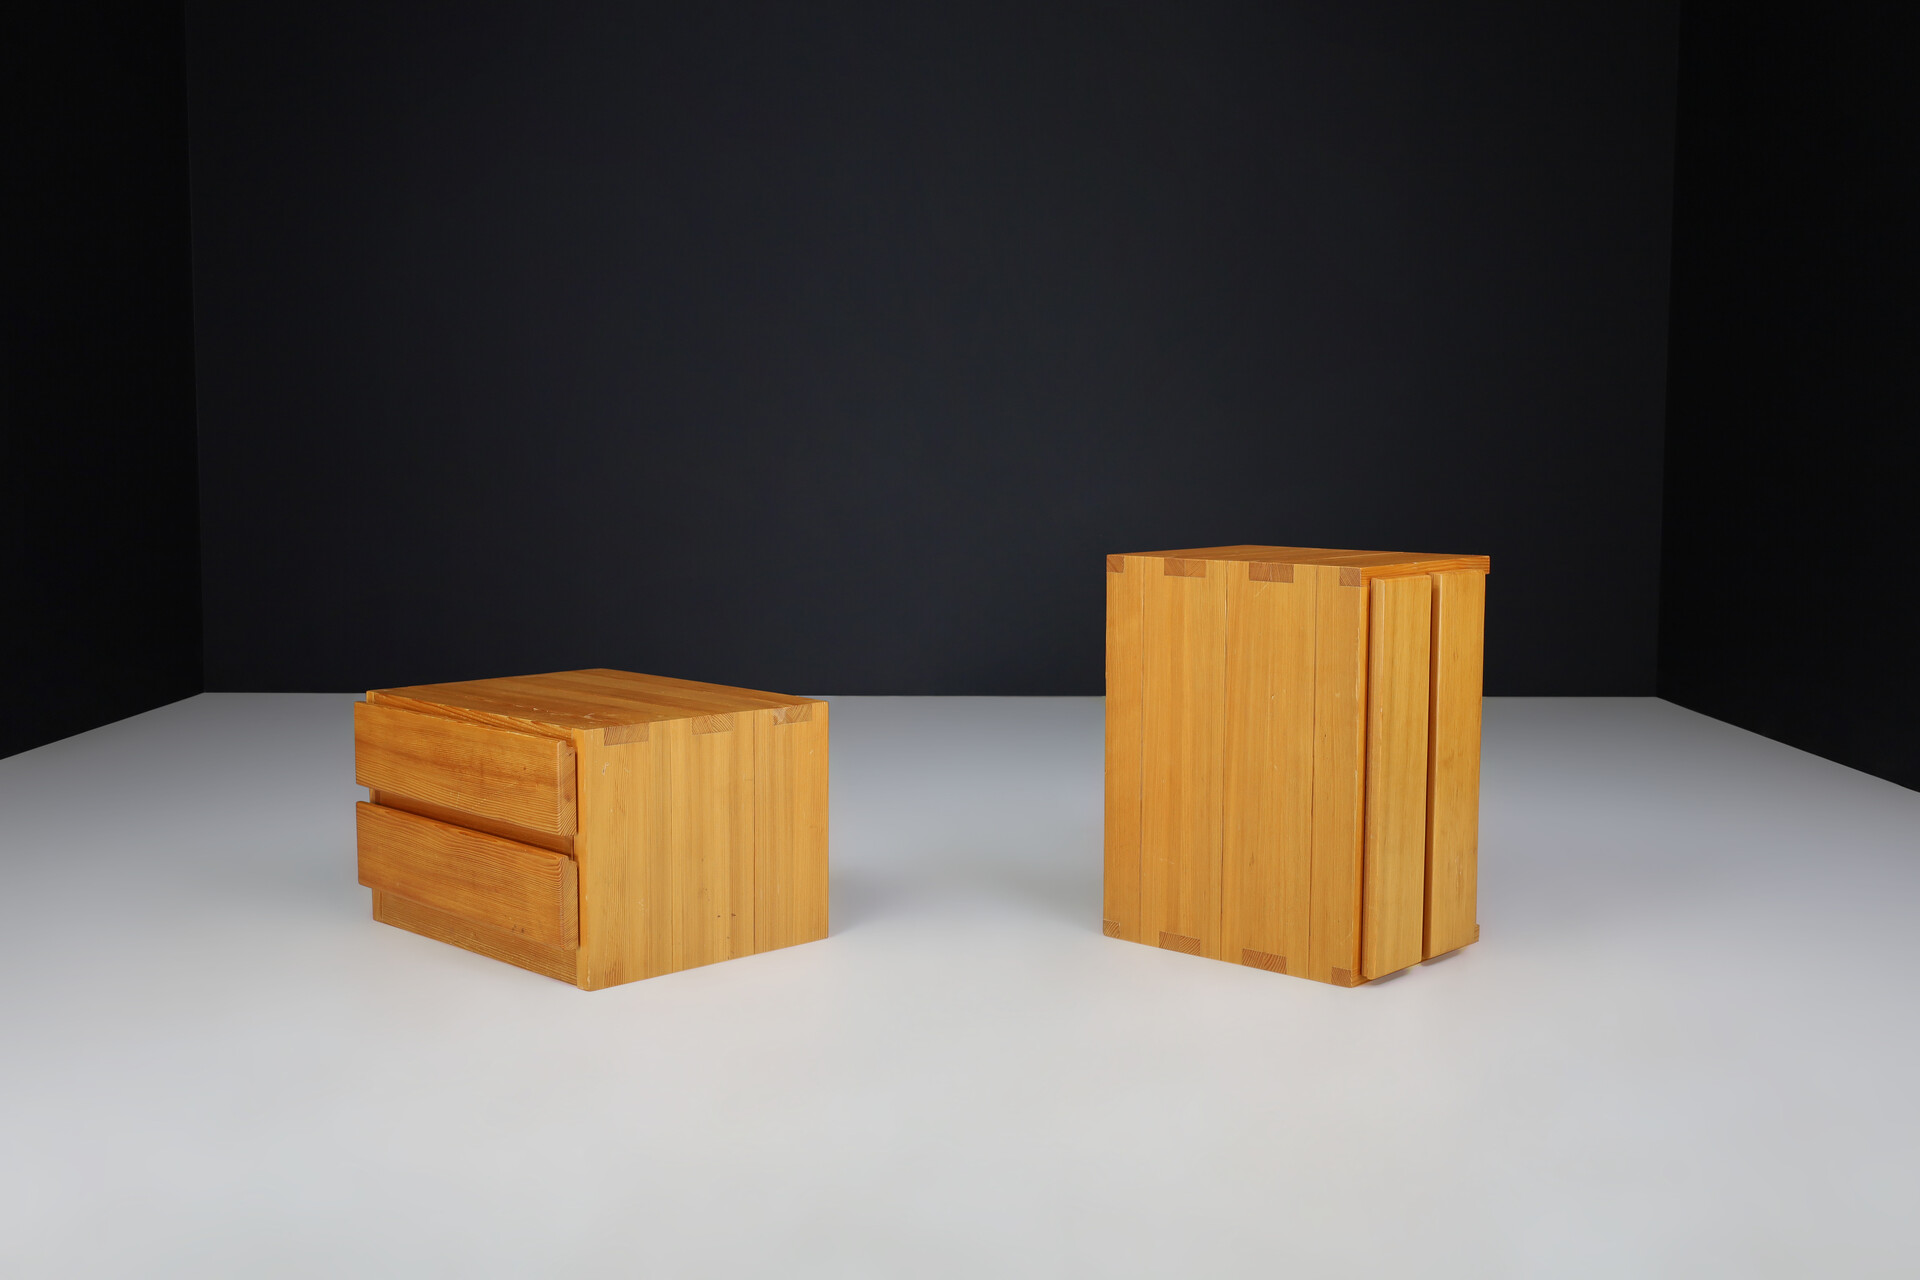 Modern Charlotte Perriand Style bed side cabinets, France 1970s Late-20th century